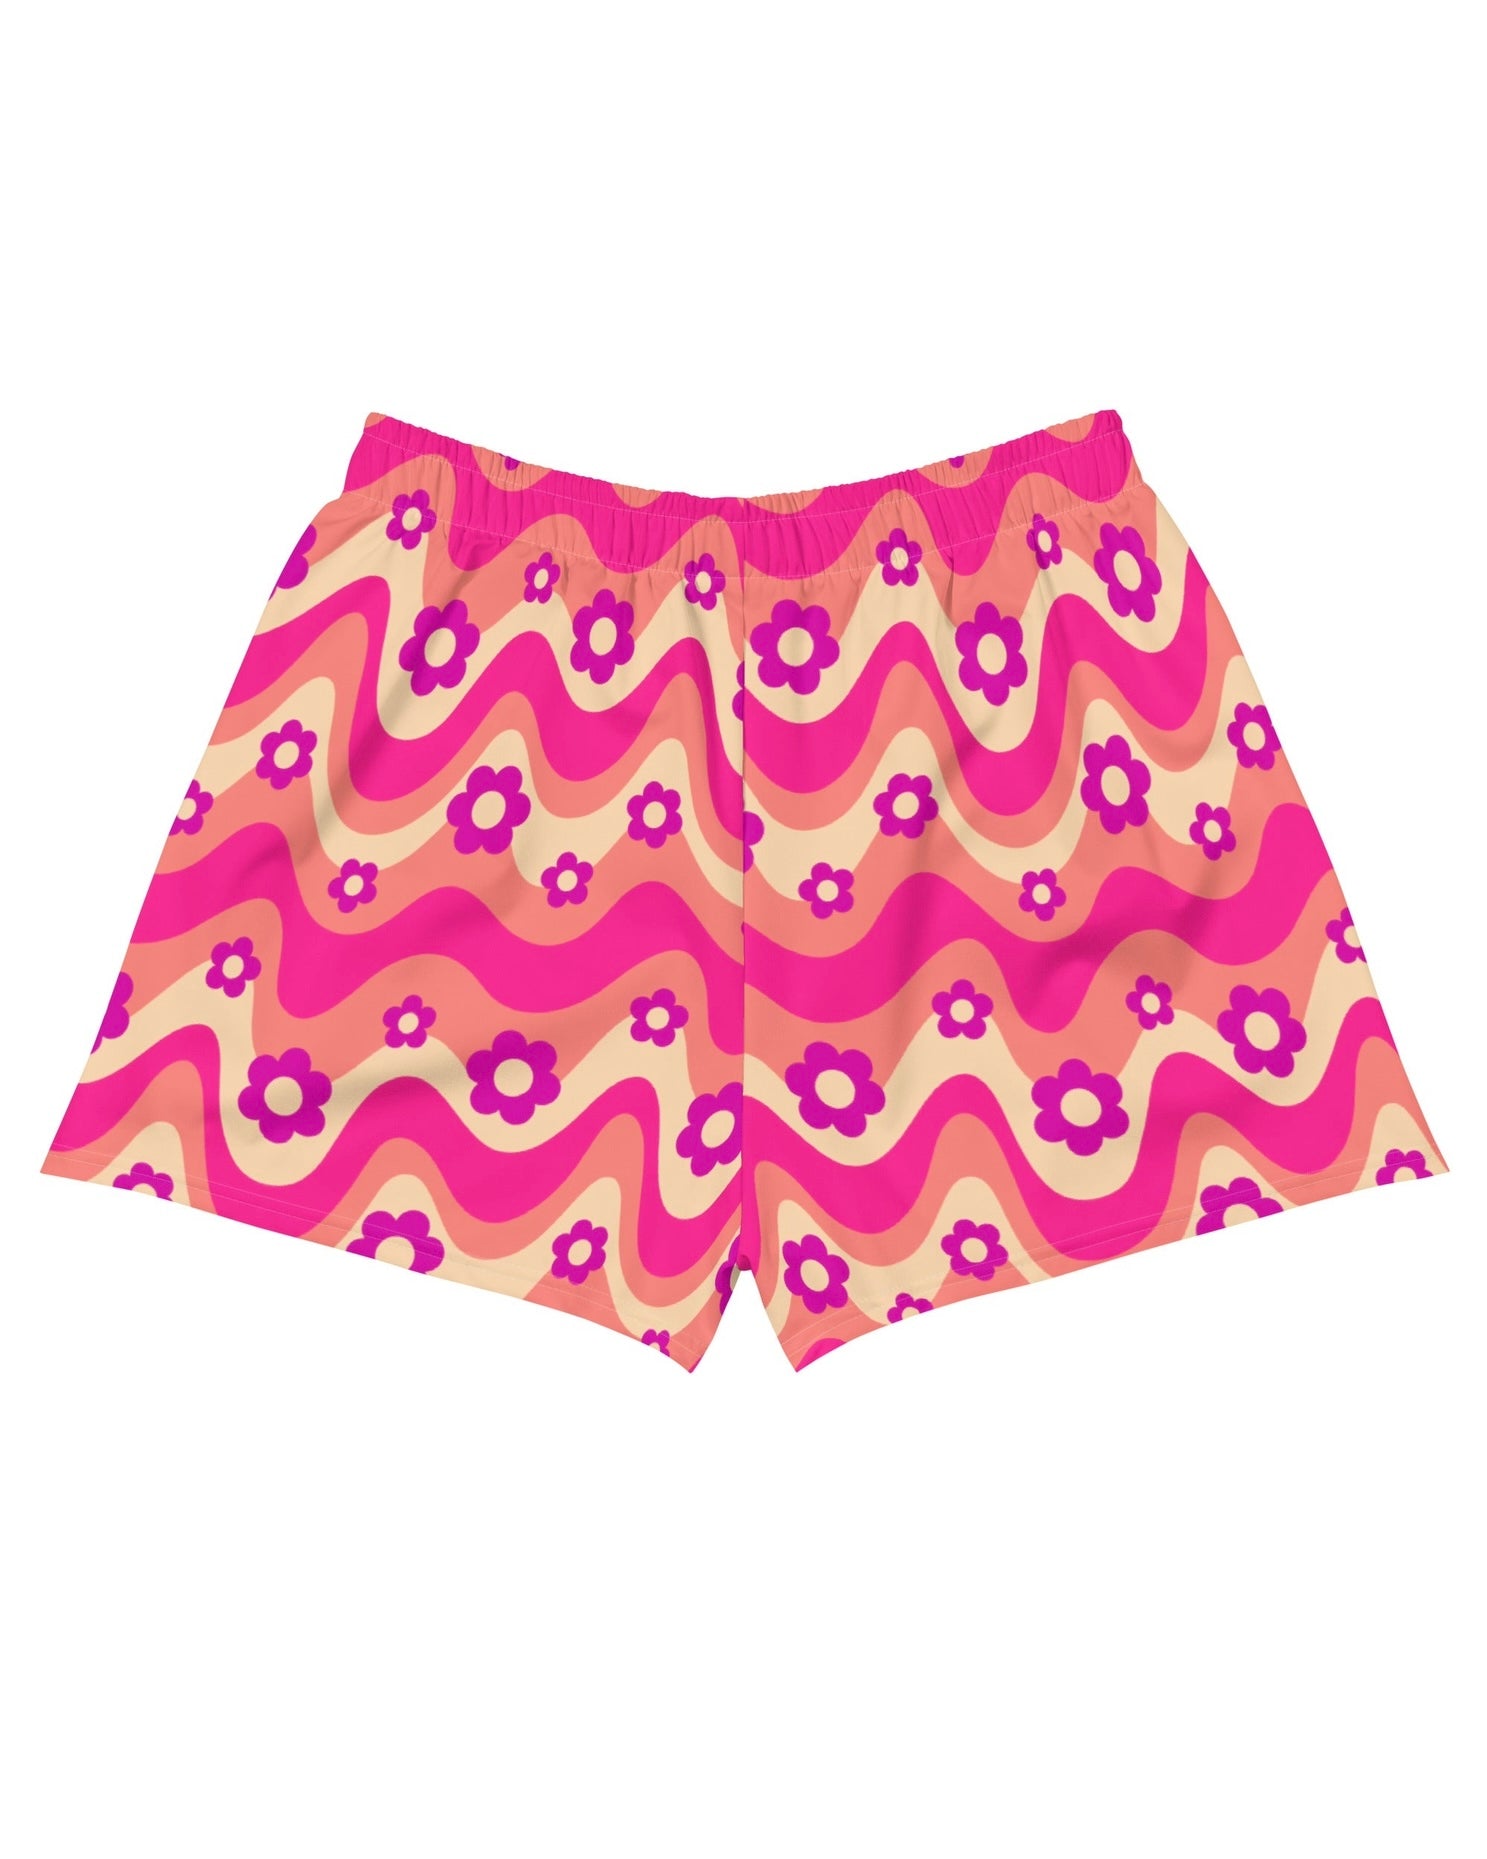 Flower Power Pink Recycled Shorts, Athletic Shorts, - One Stop Rave